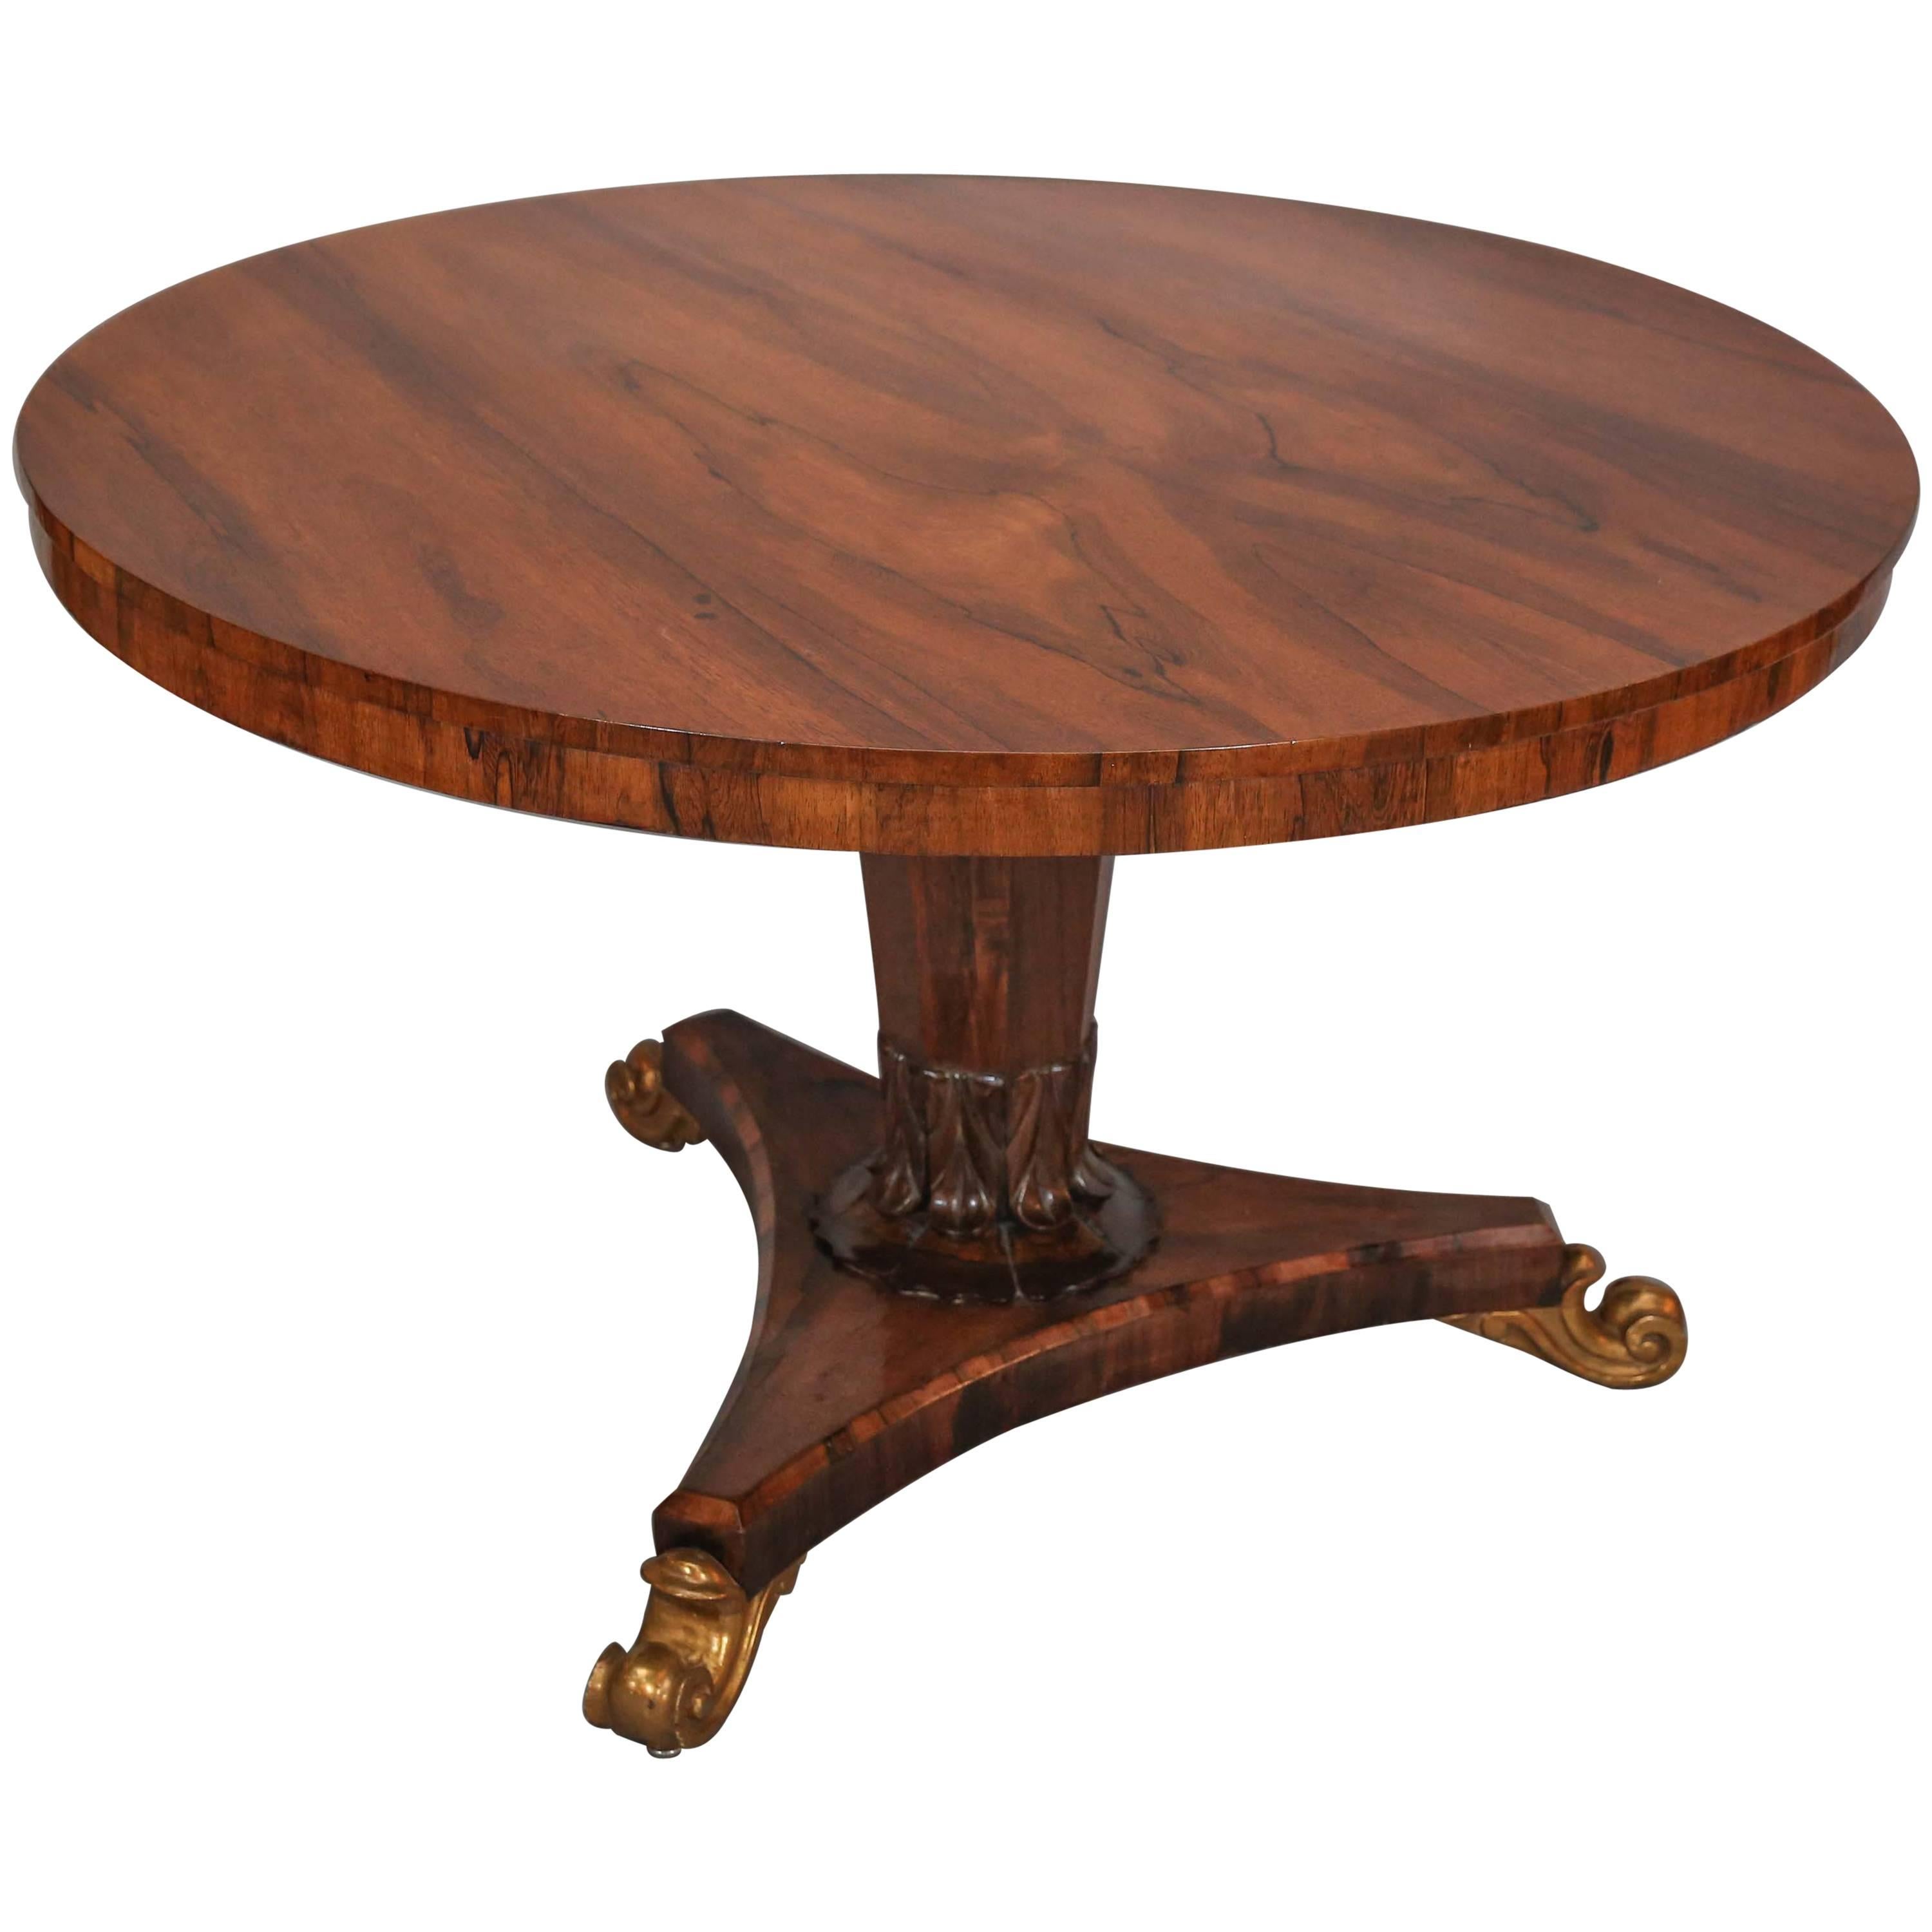 Antique English Regency Rosewood Tilt-Top Table with Gilt Feet